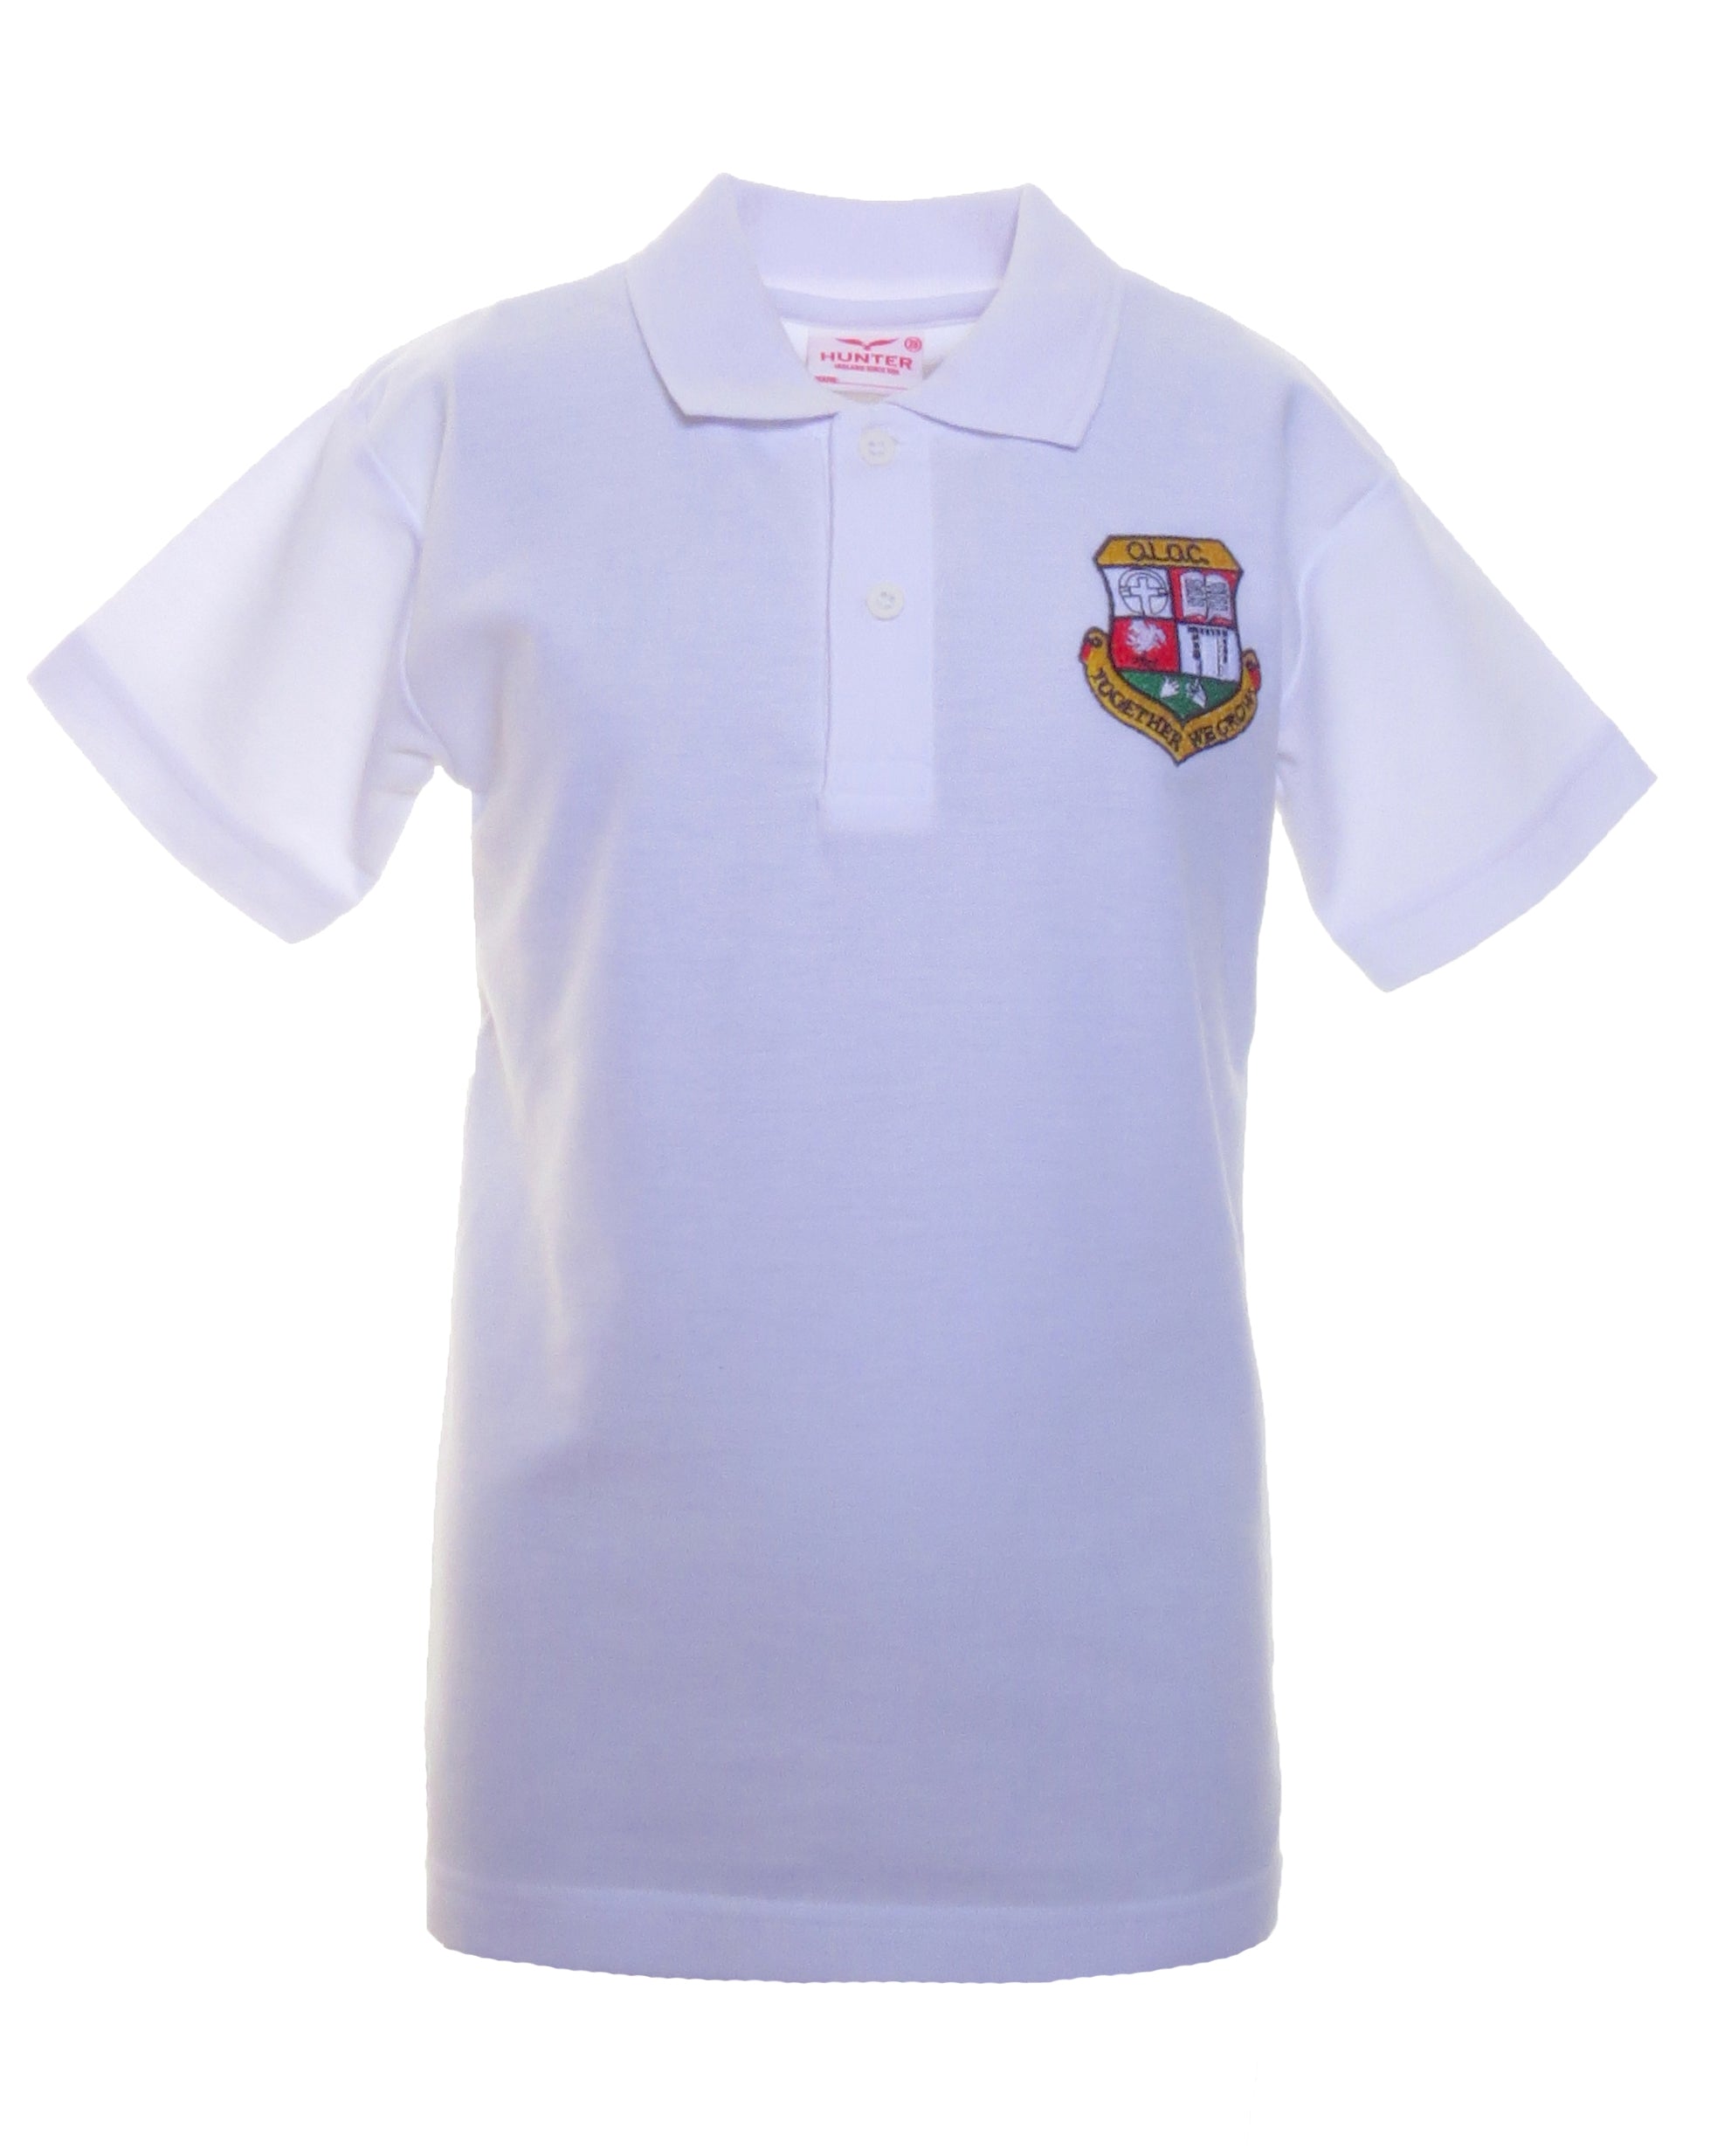 Our Lady Of Consolations Crested Polo Shirt